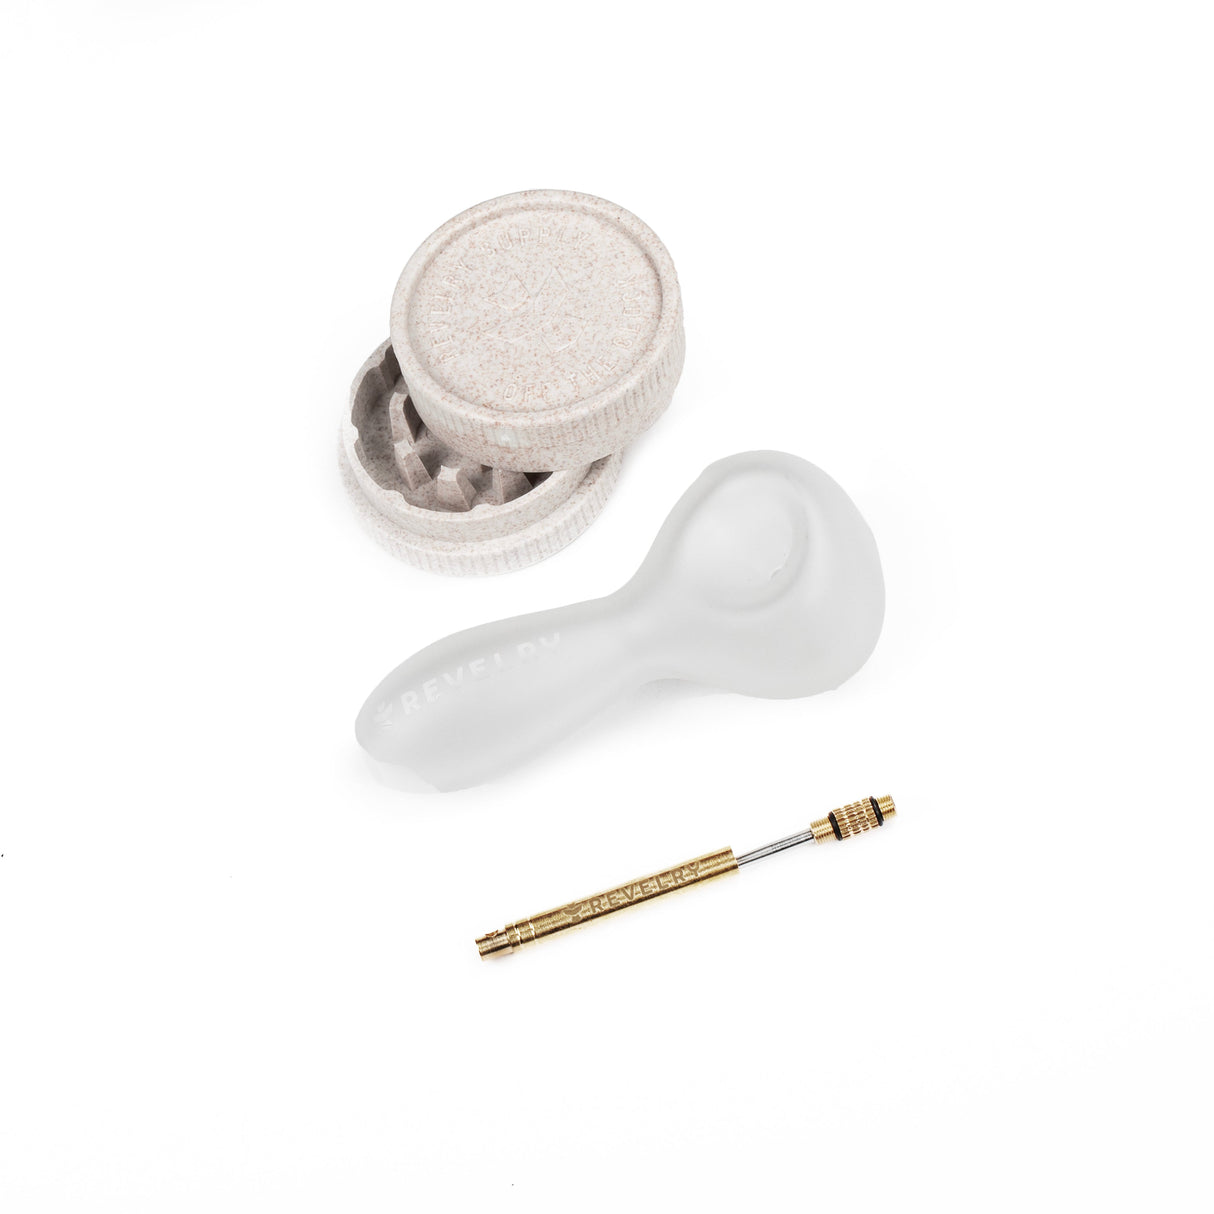 Revelry Supply The Pipe Kit - Smell Proof, Compact Travel Kit with Grinder and Pipe